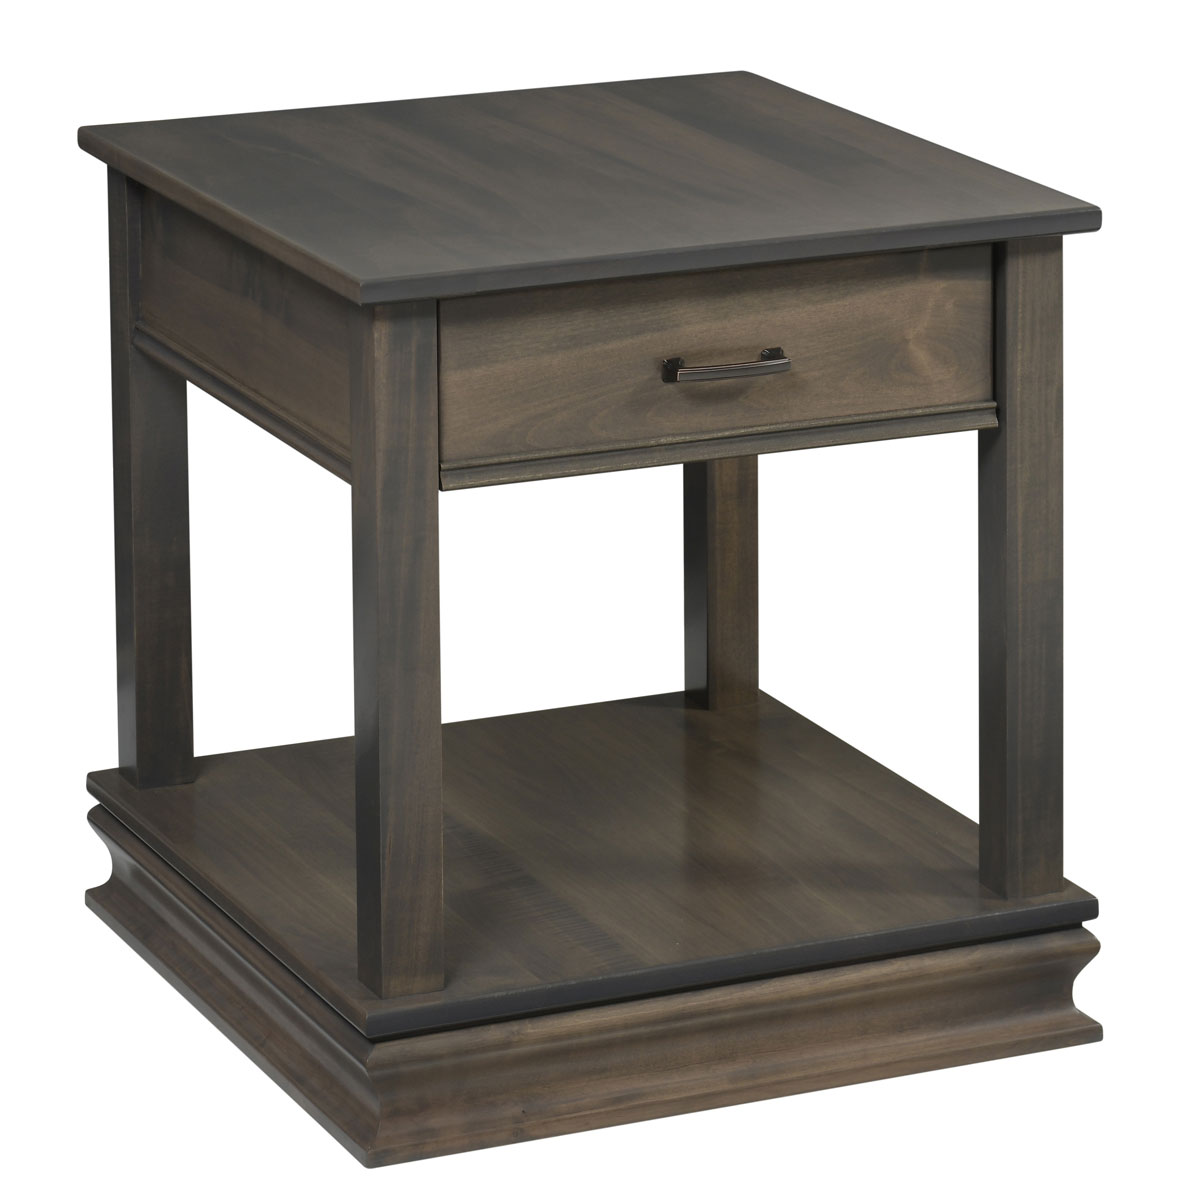 Burlington End Table shown in Brown Maple with OCS-121 Smoke Finish. 